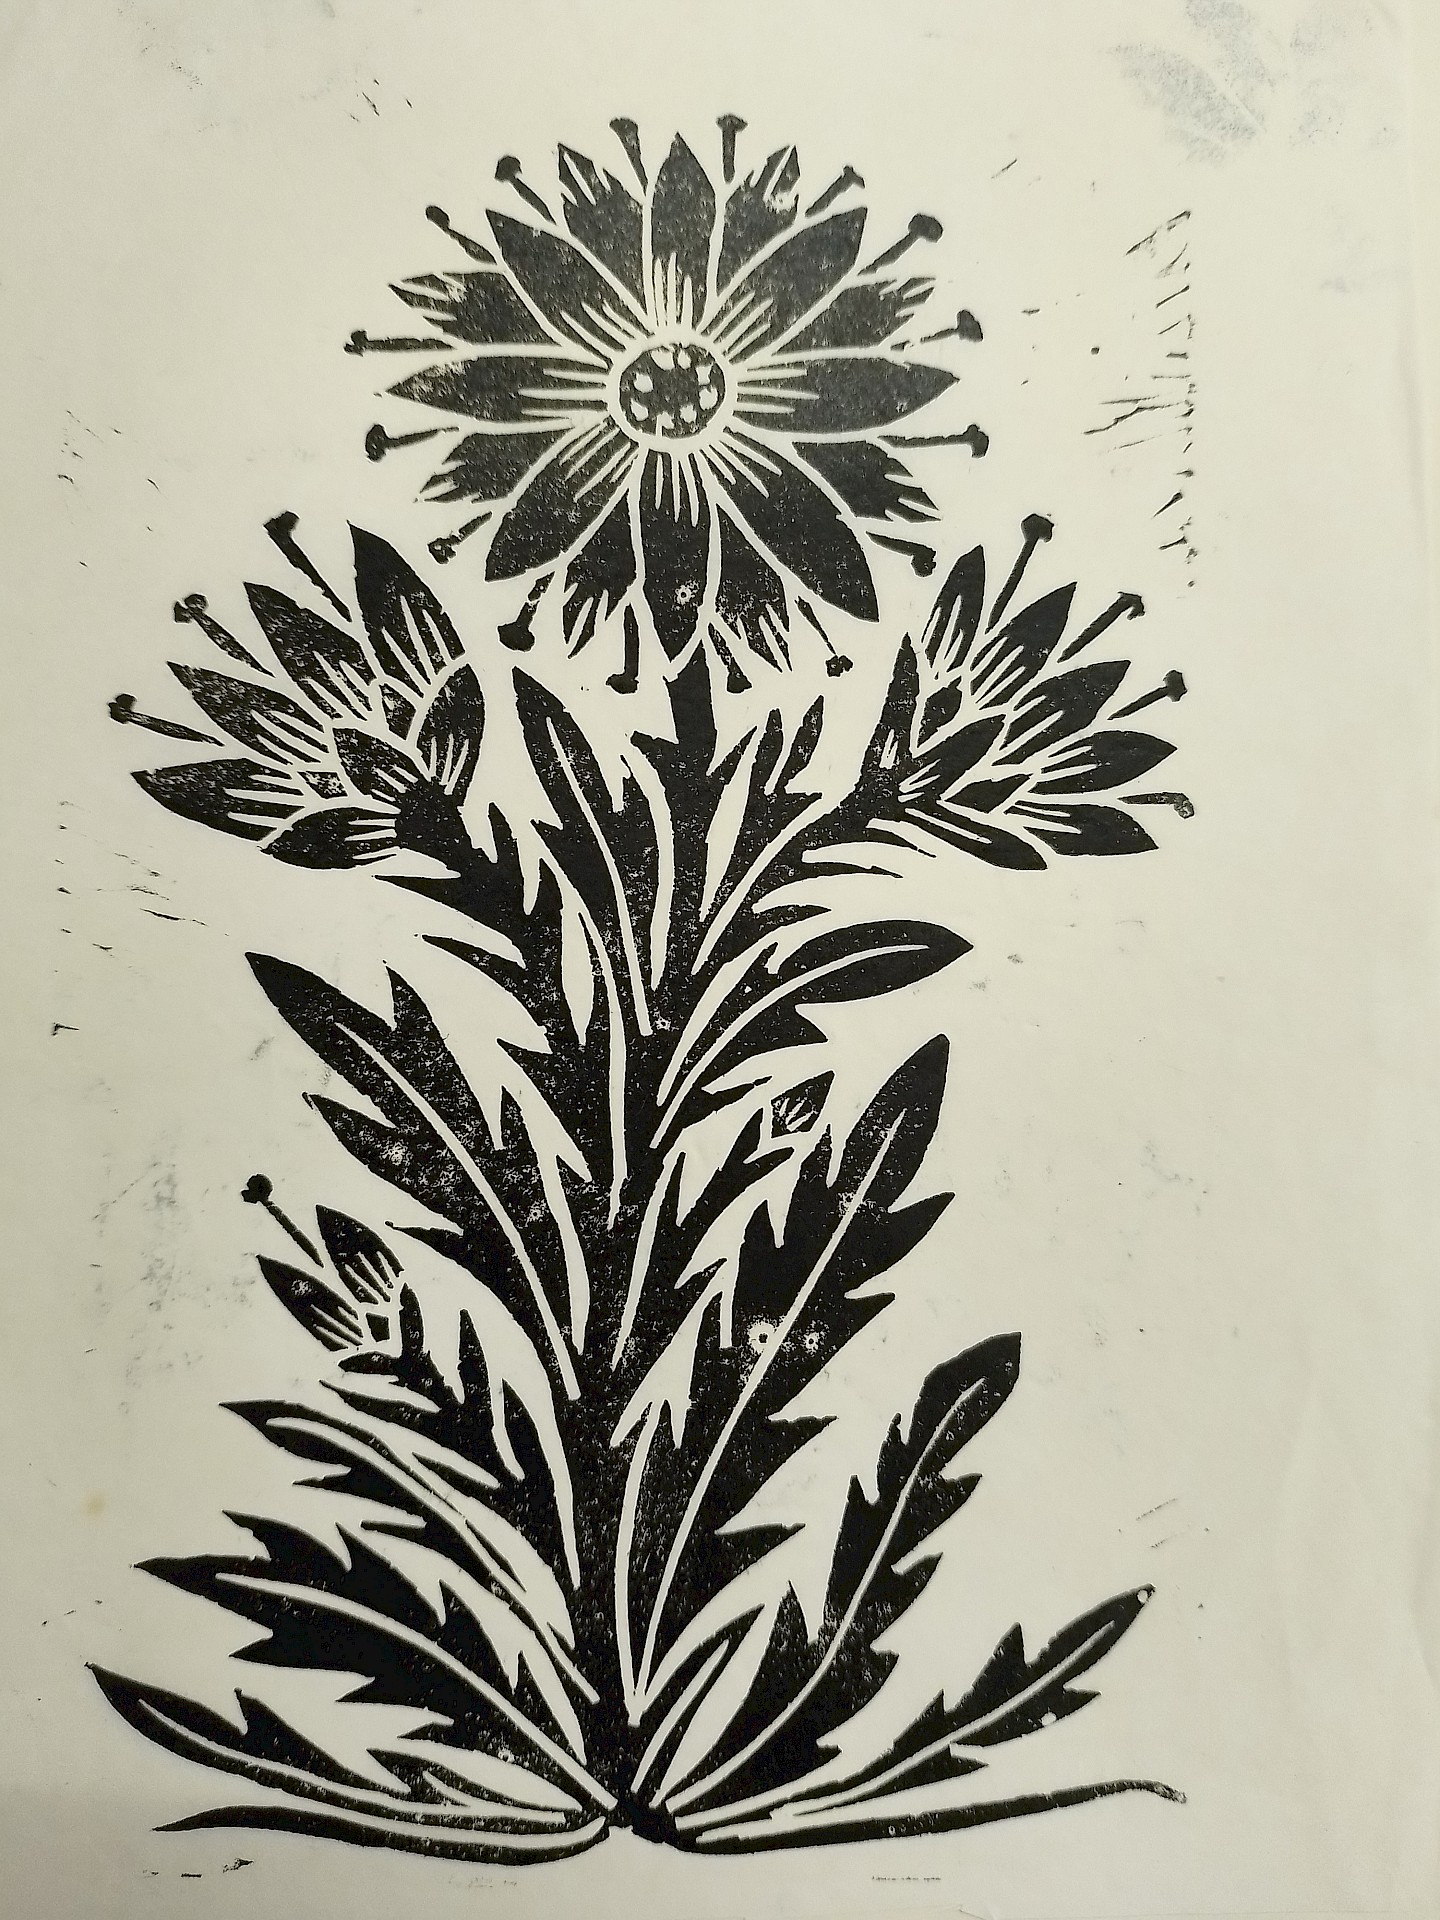 Flower in linoleum print from the archive stock